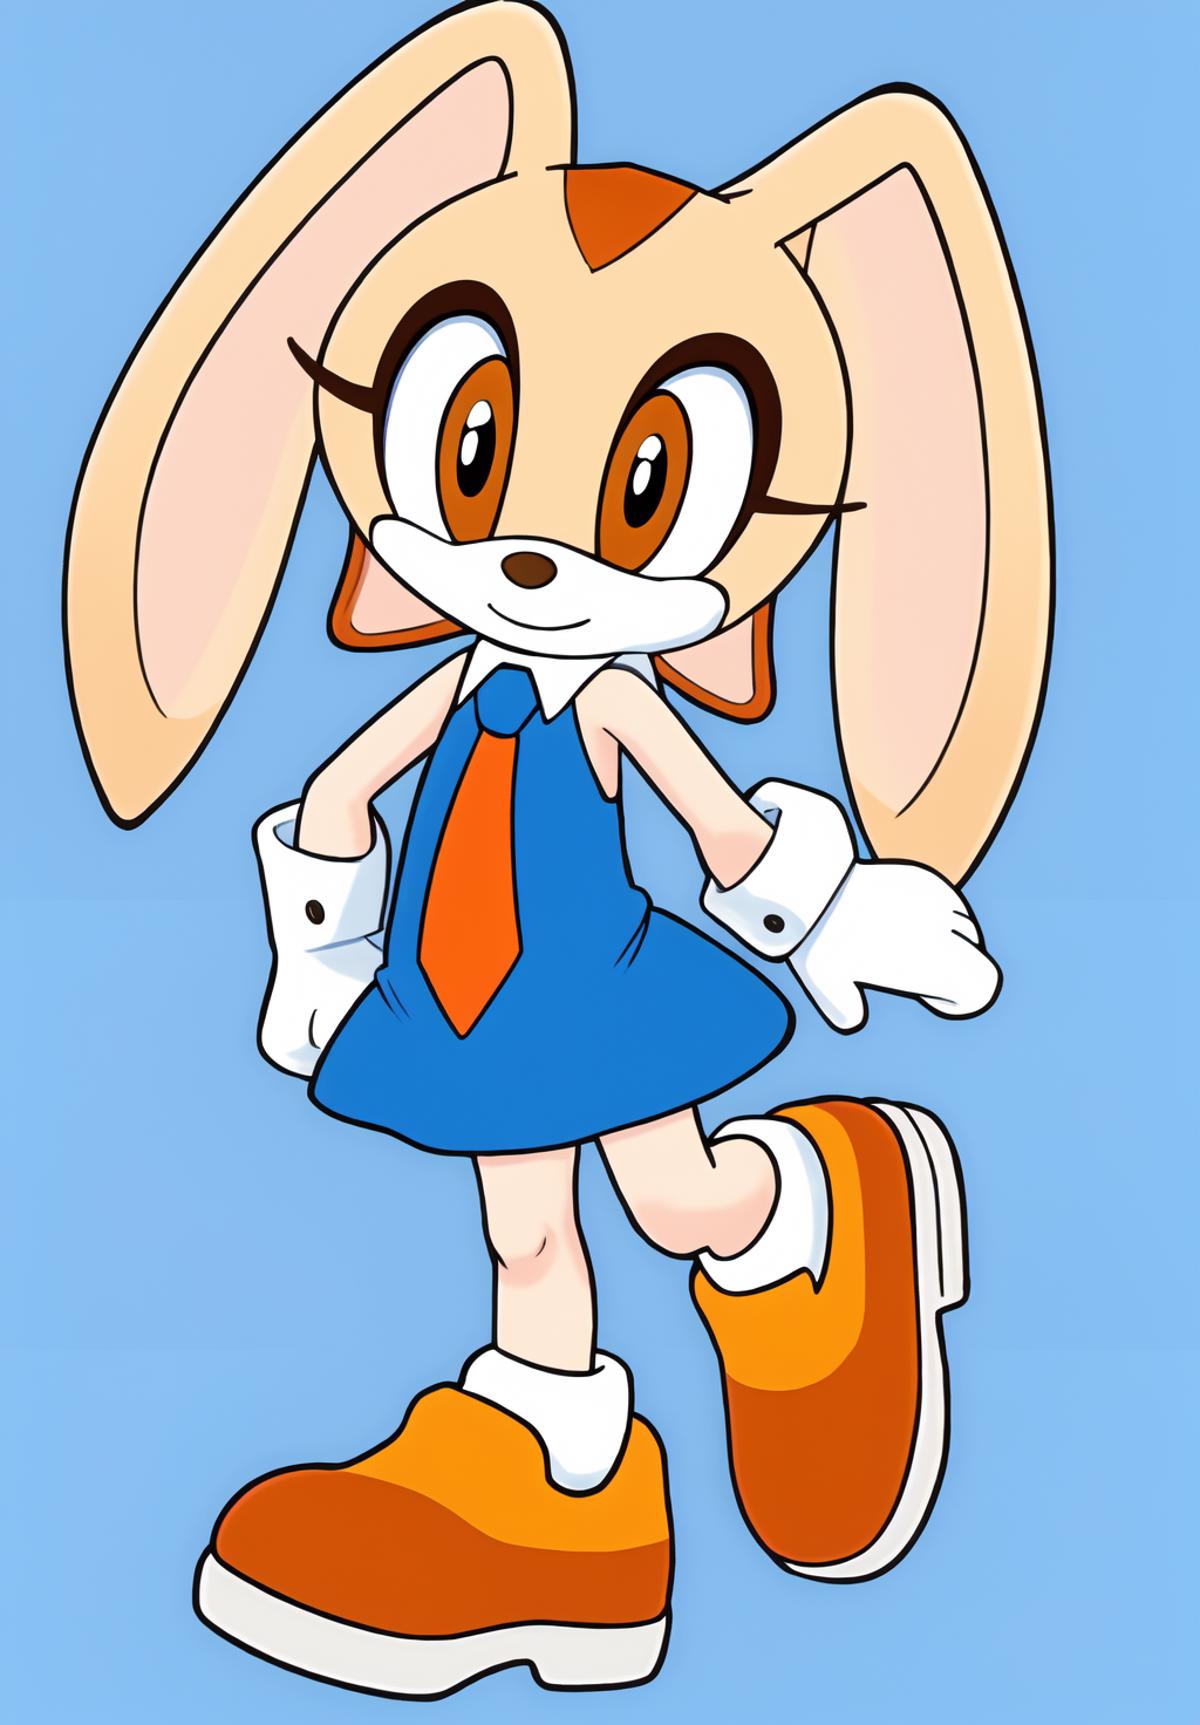 Cream the Rabbit - Sonic the Hedgehog image by AsaTyr